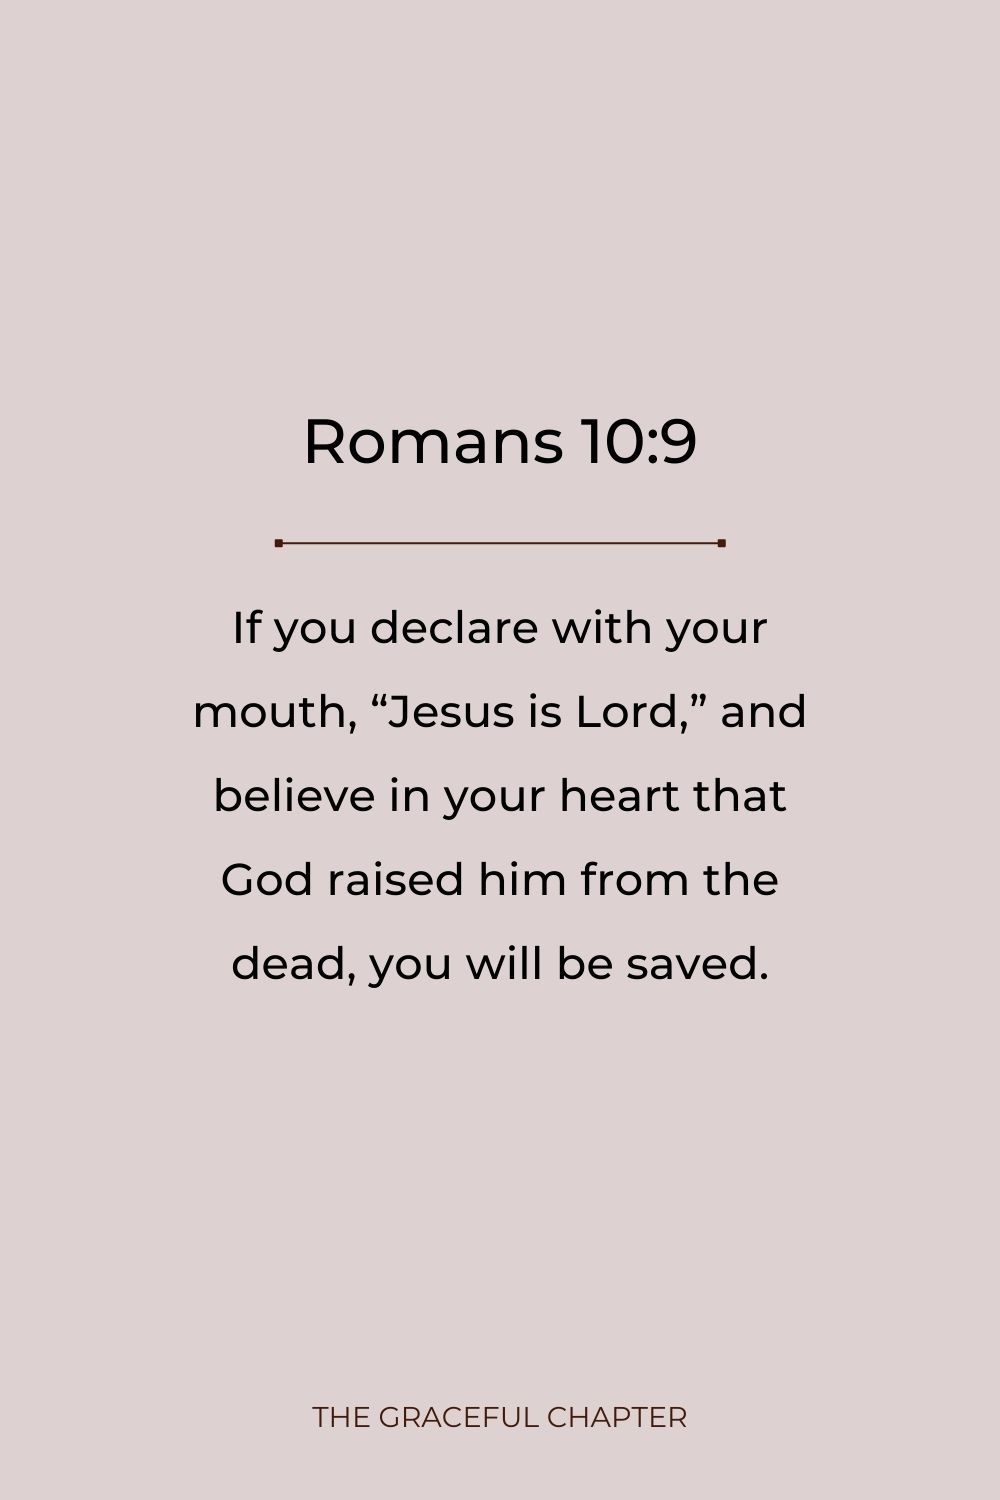 If you declare with your mouth, “Jesus is Lord,” and believe in your heart that God raised him from the dead, you will be saved. Romans 10:9